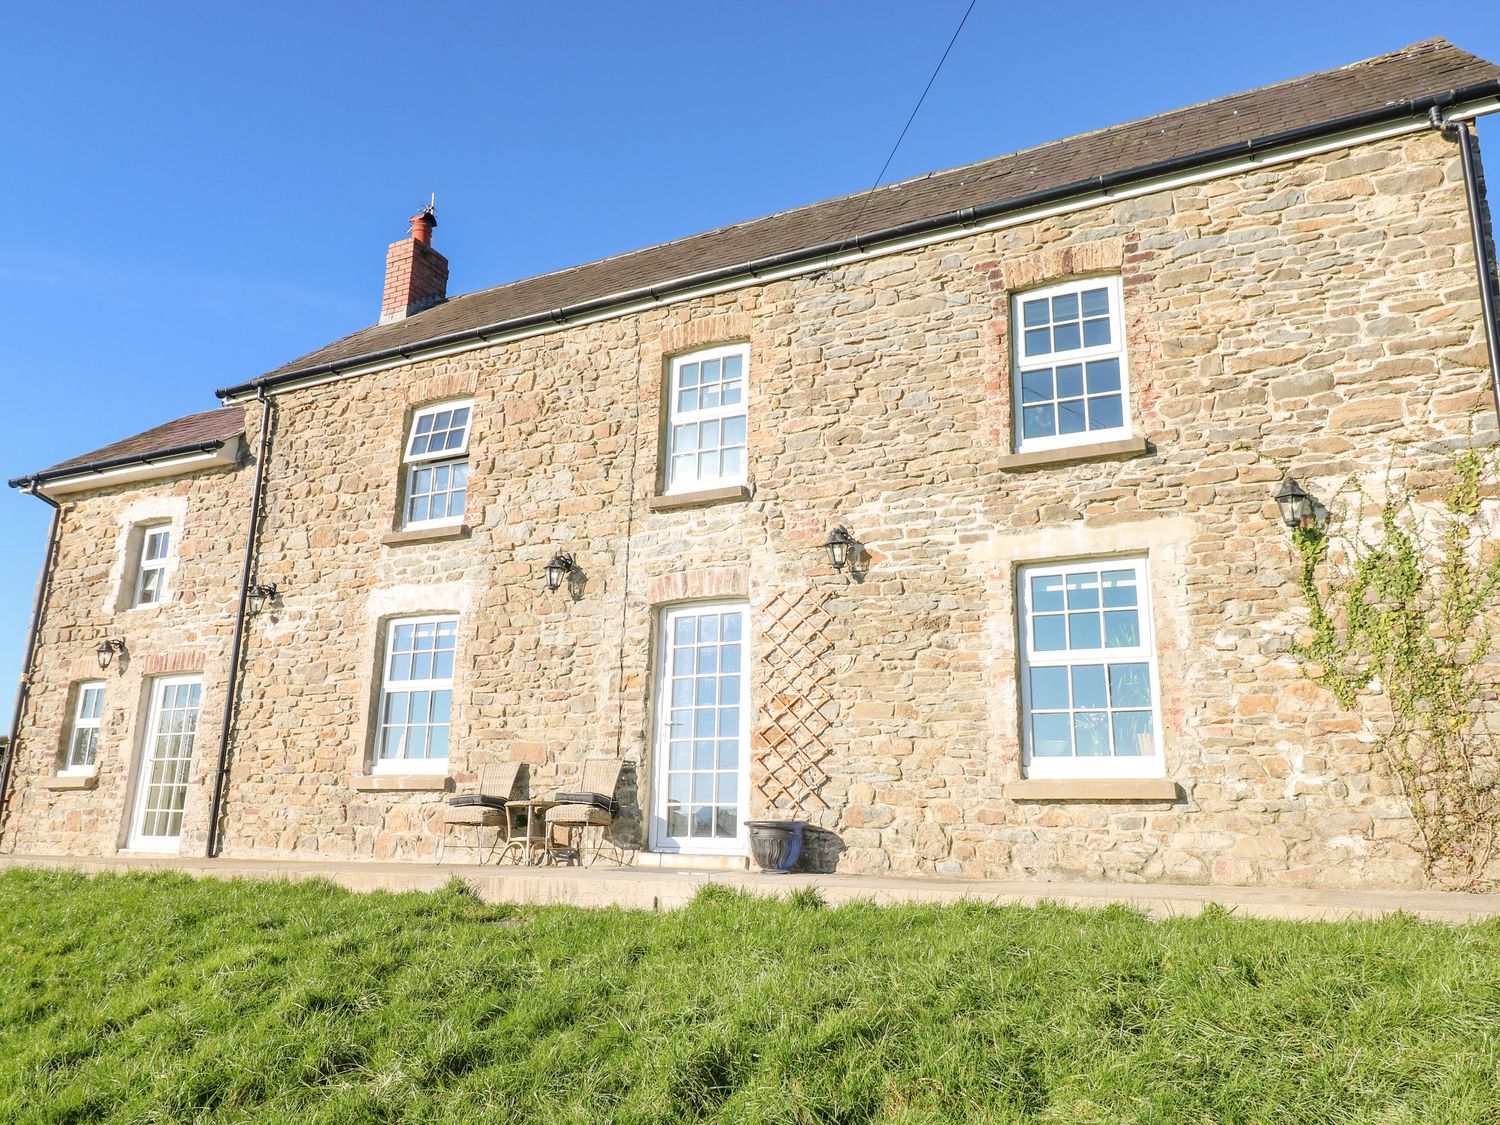 Rustic Period Country Farmhouse - South Wales - 1126255 - photo 1